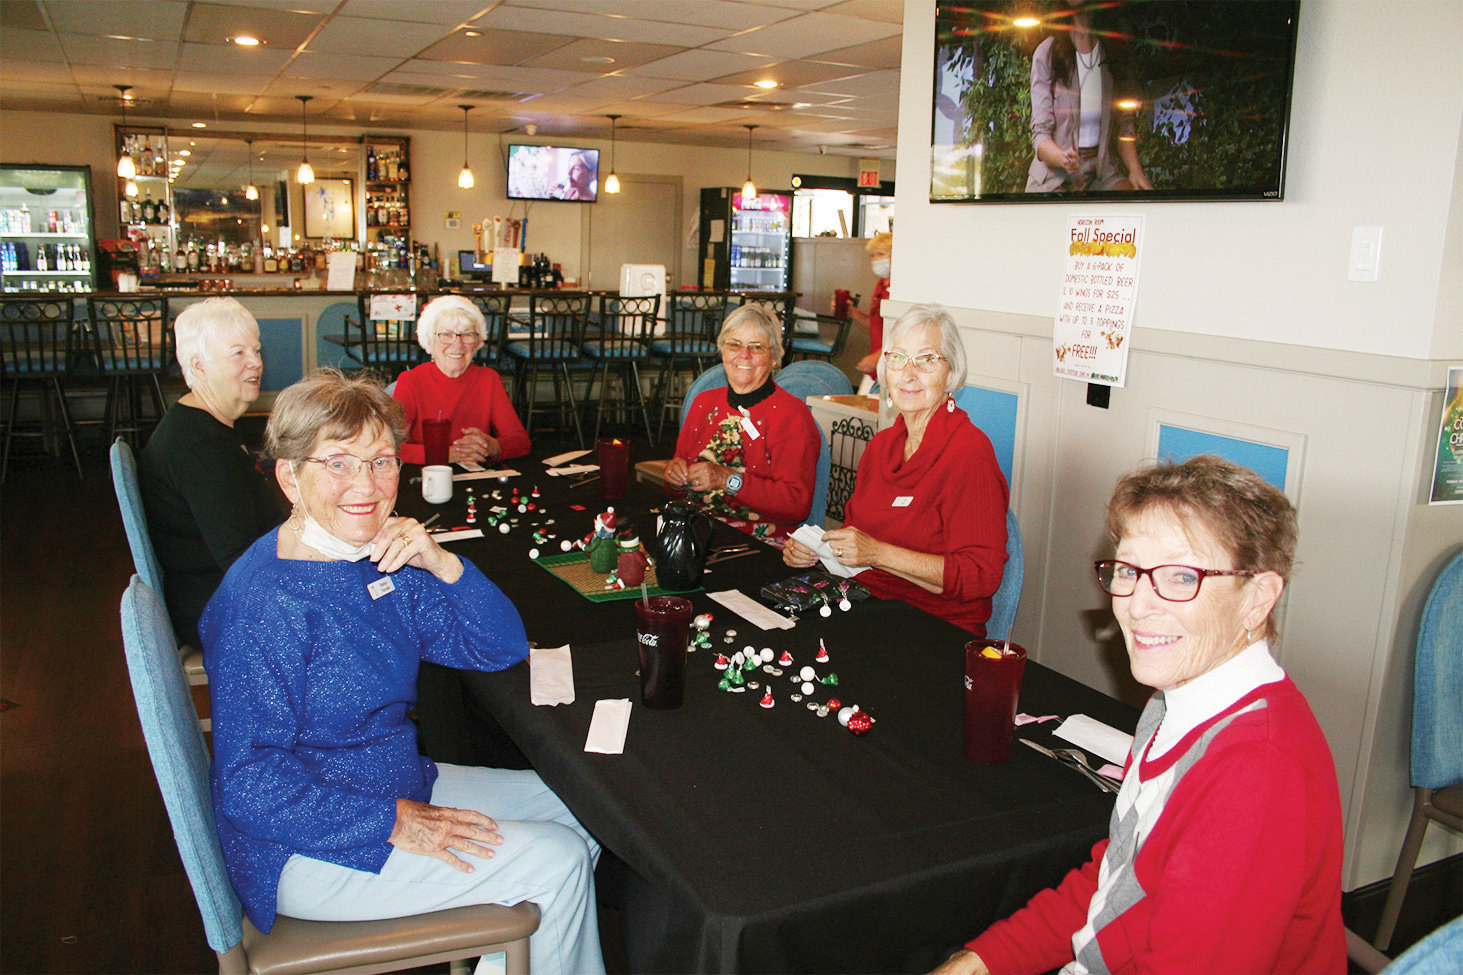 Pictured (left to right) are Marilyn Klooster, Judy Johnston, Nancy Ott, Bev Launer, Jody Elkey, and Char Donaldson.